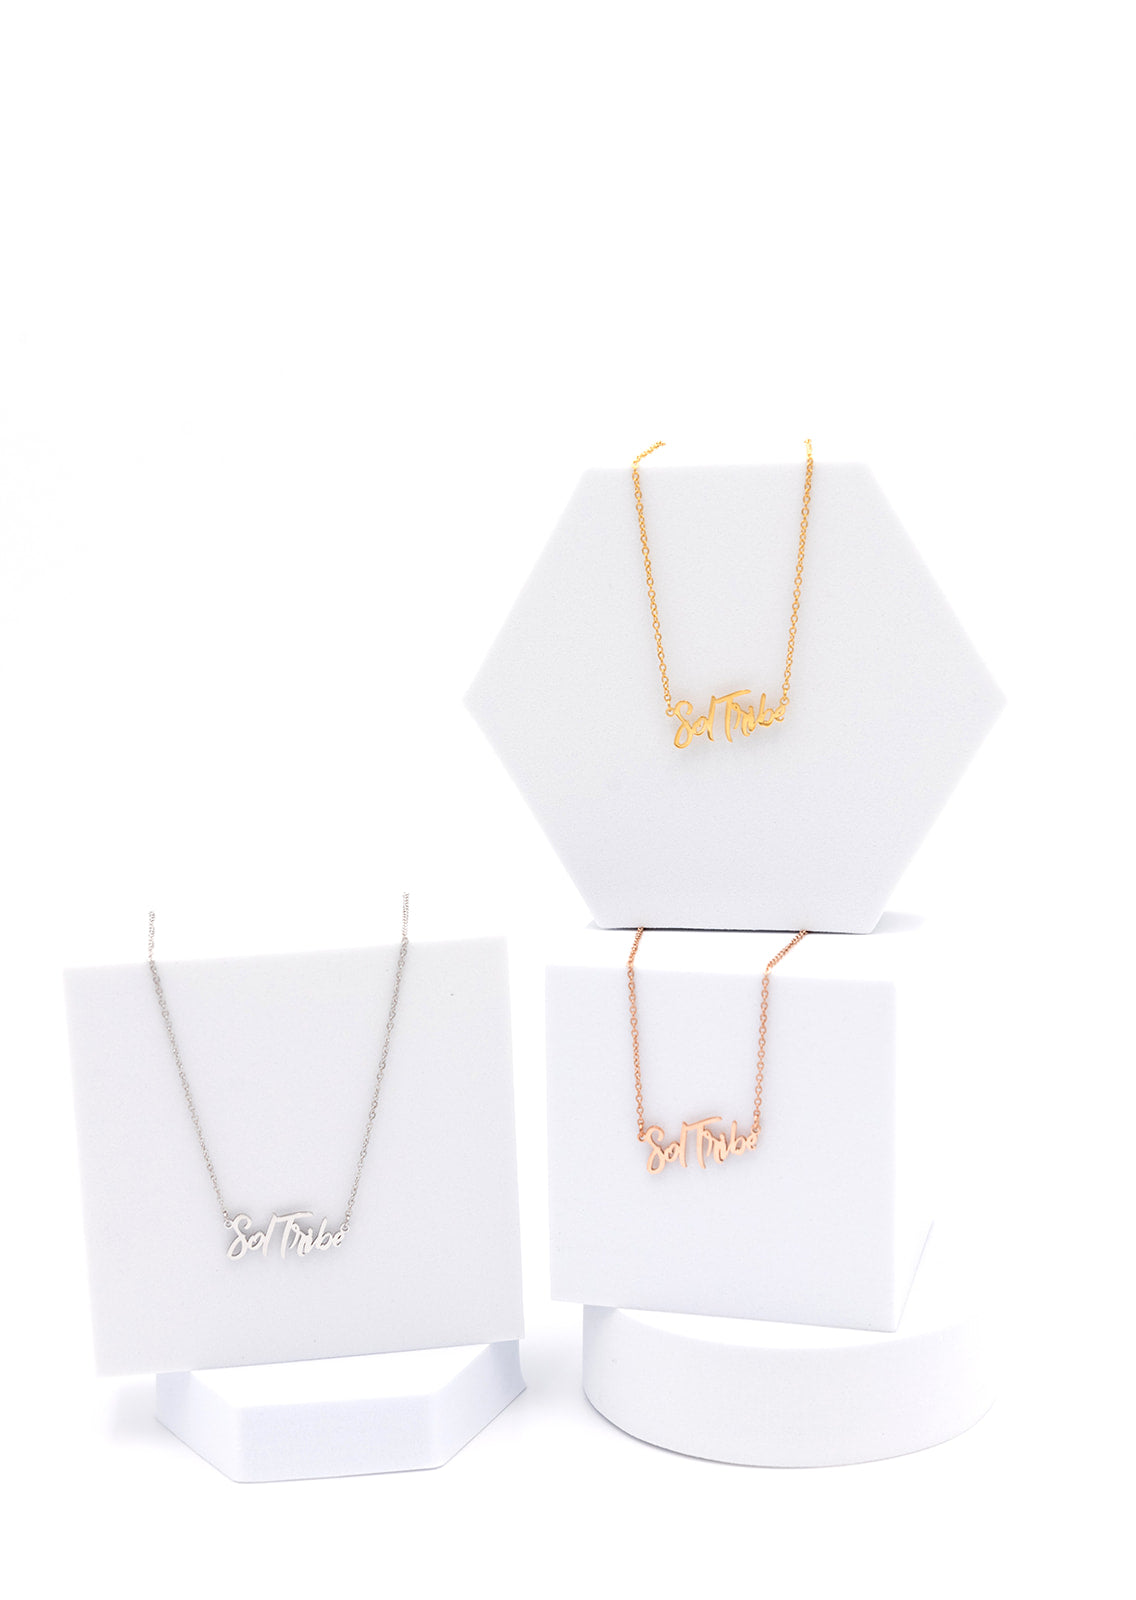 mini soltribe affirmation necklaces for kids and adults from Sol Rise Essentials